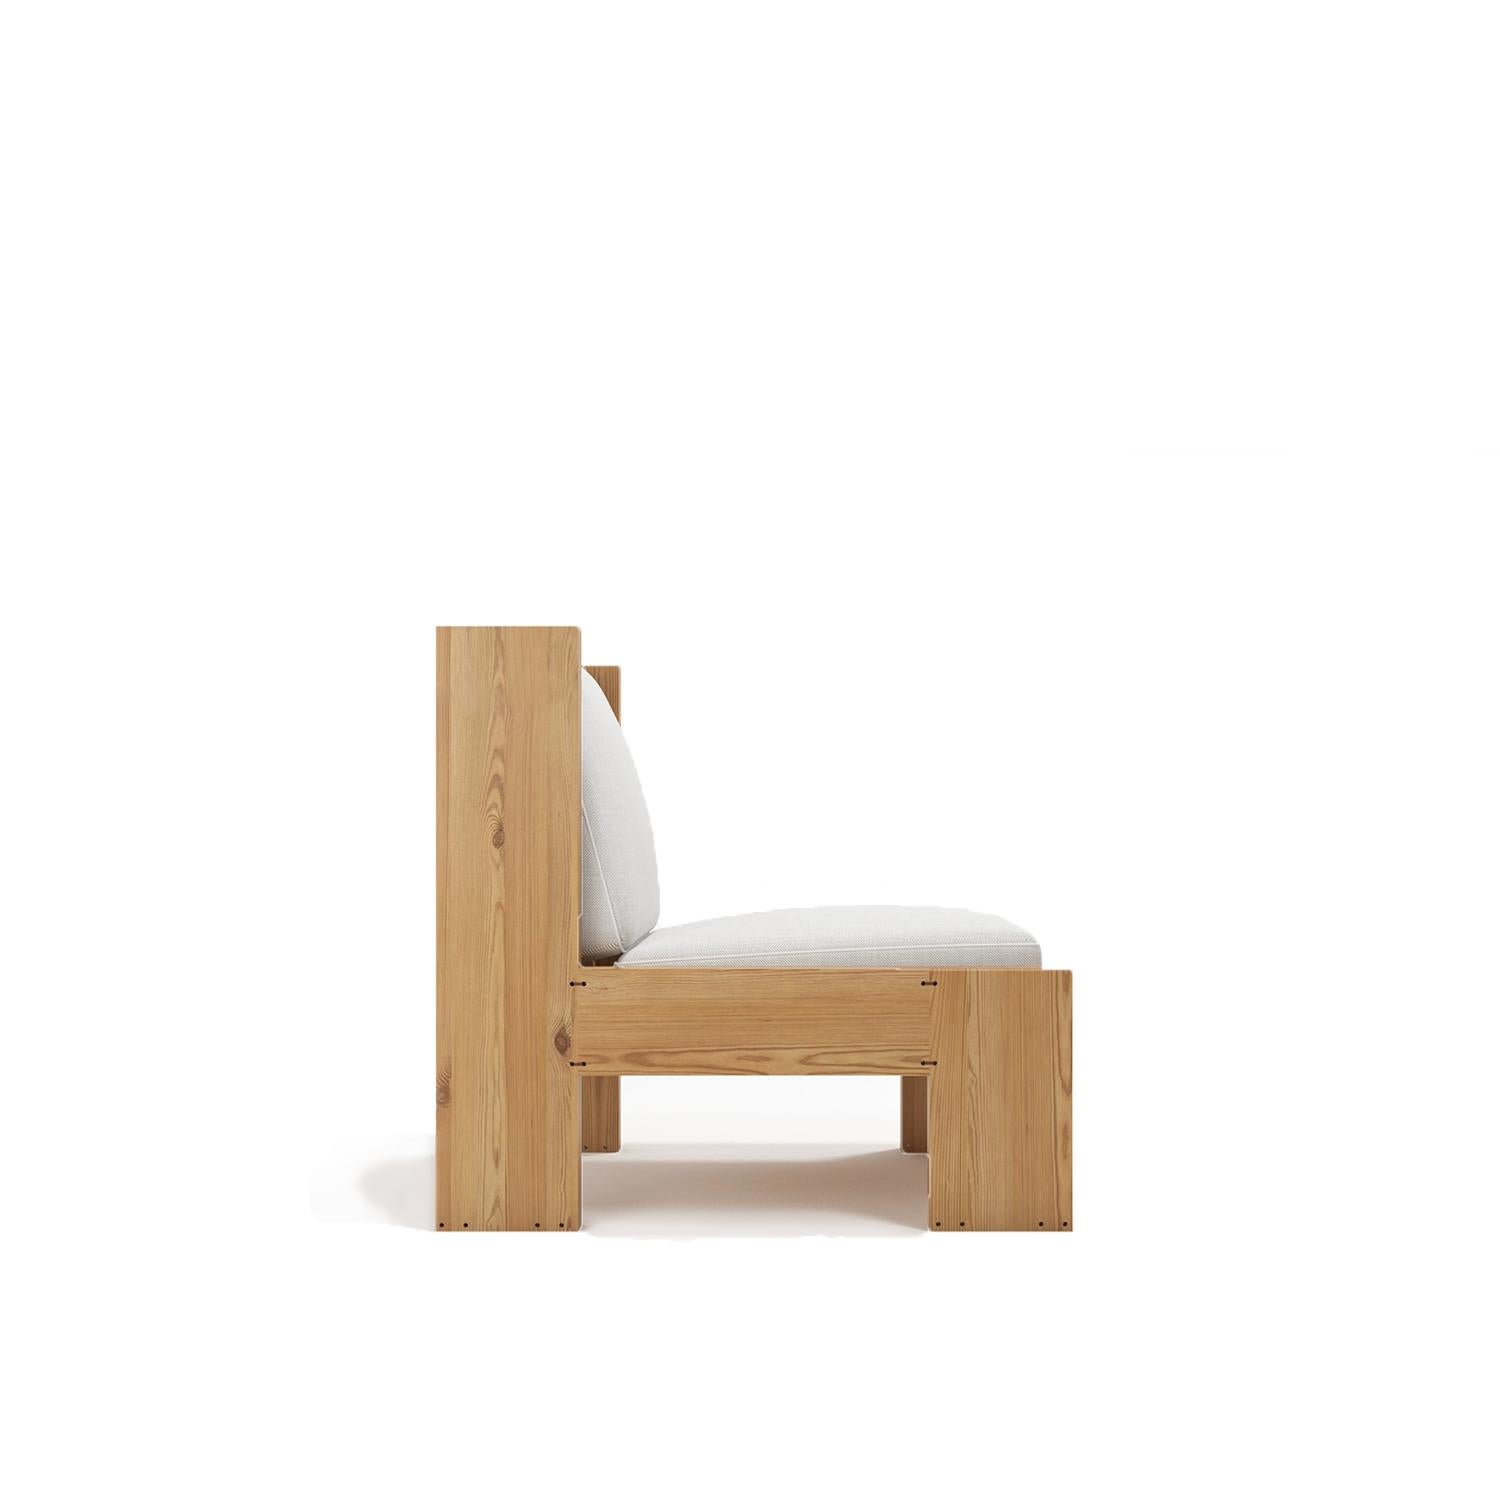 Indulge in comfort with the Frenzo chair. Upholstered with calming fabric, this chair also features a massive oak frame for superior support. Relax and enjoy an unbeatable seating experience.

All Tektōn pieces are made of natural massive